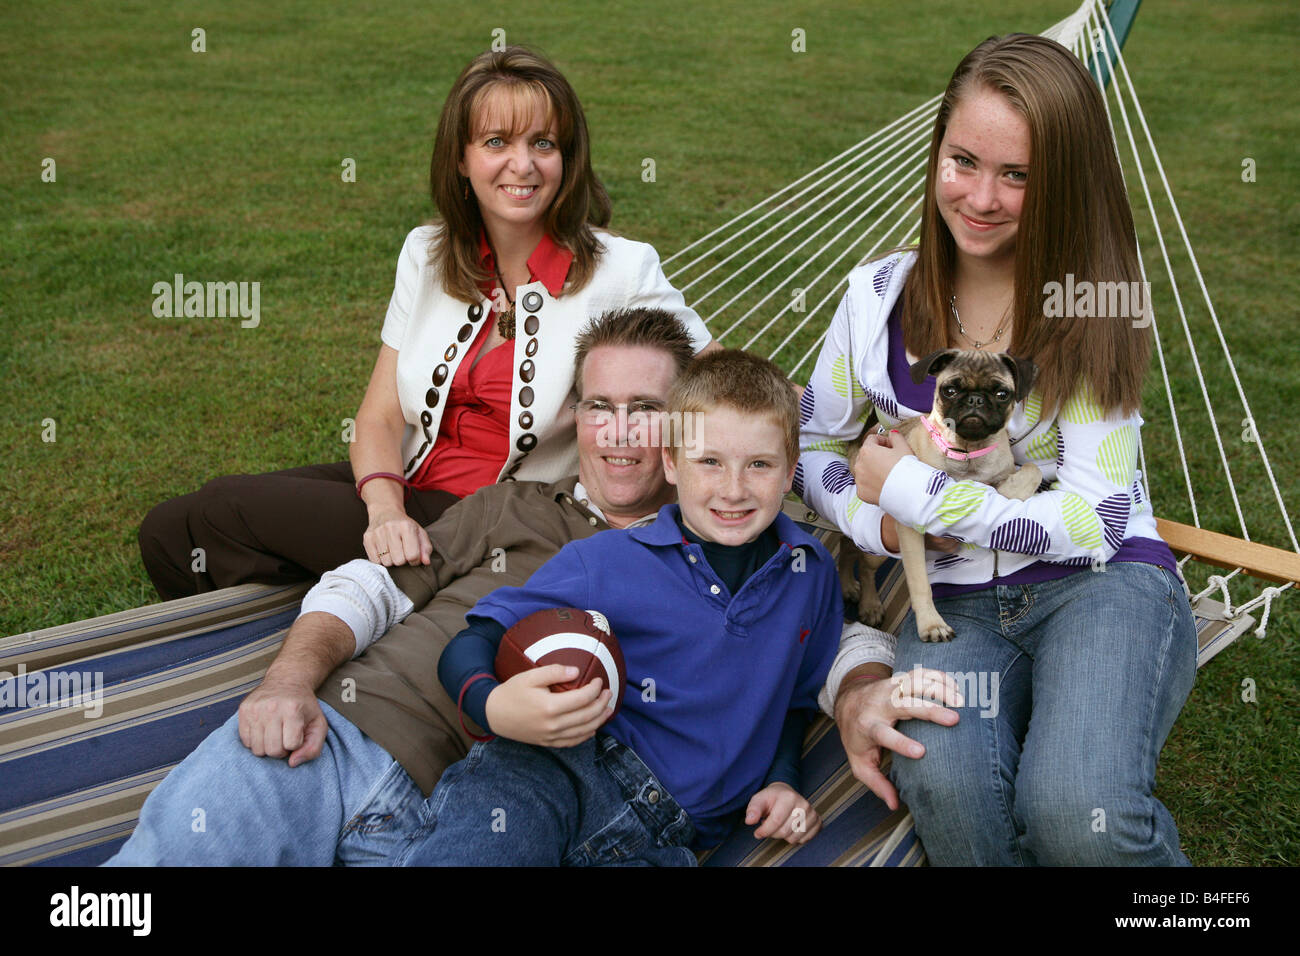 Happy Family with one son and one daughter father and mother in back yard at home with football and pet dog Stock Photo